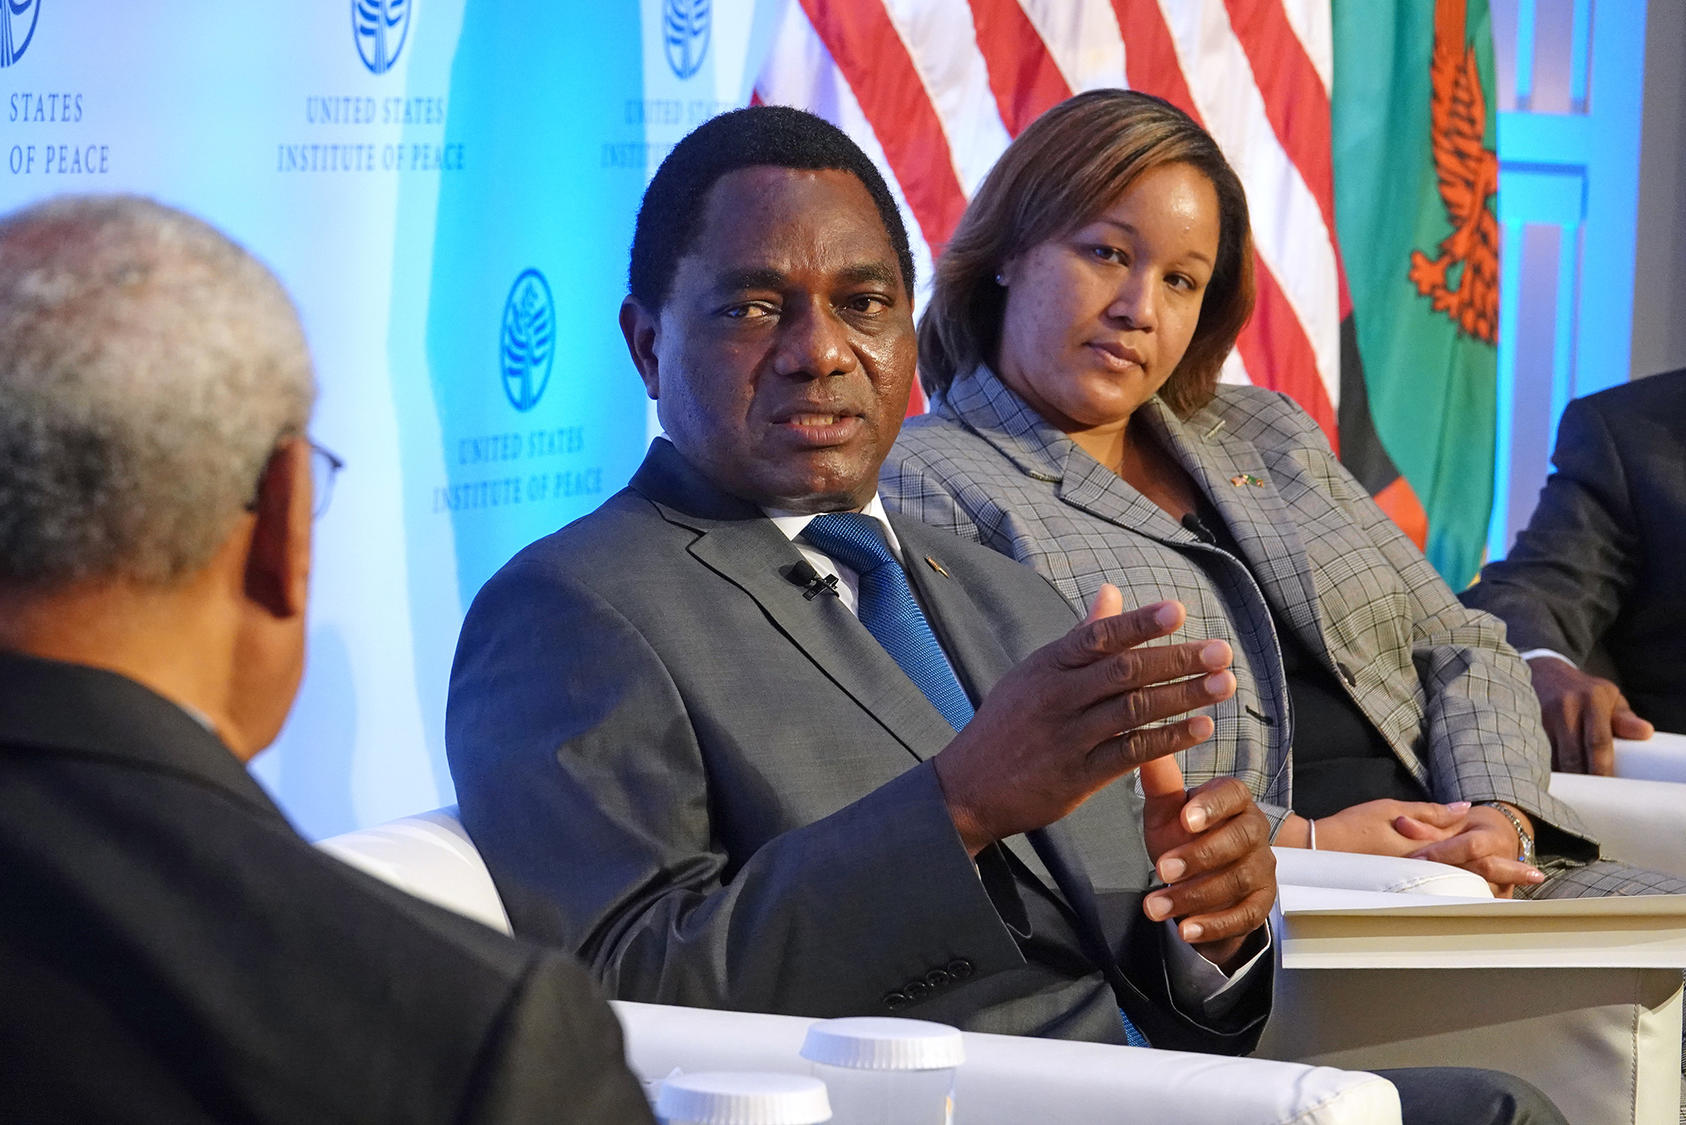 Zambian President Hakainde Hichilema, a business executive elected in his sixth campaign for president, responds to a question from USIP’s vice chair, George Moose. National Security Council Senior director for Africa Dana Banks listens at right.